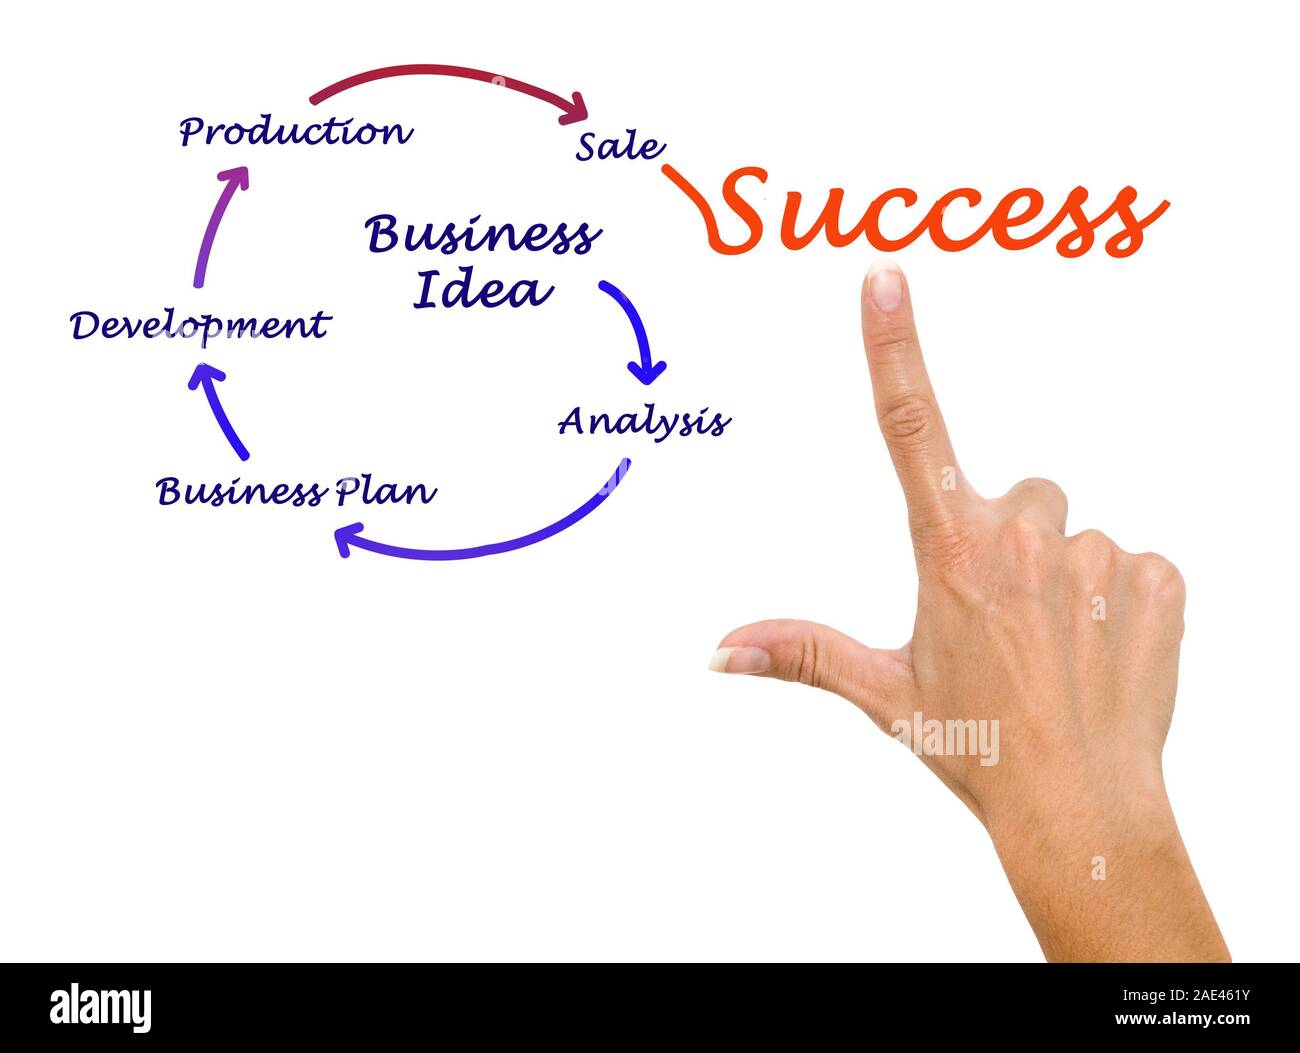 Creating a Successful Salon Business Plan: A Step-by-Step Guide